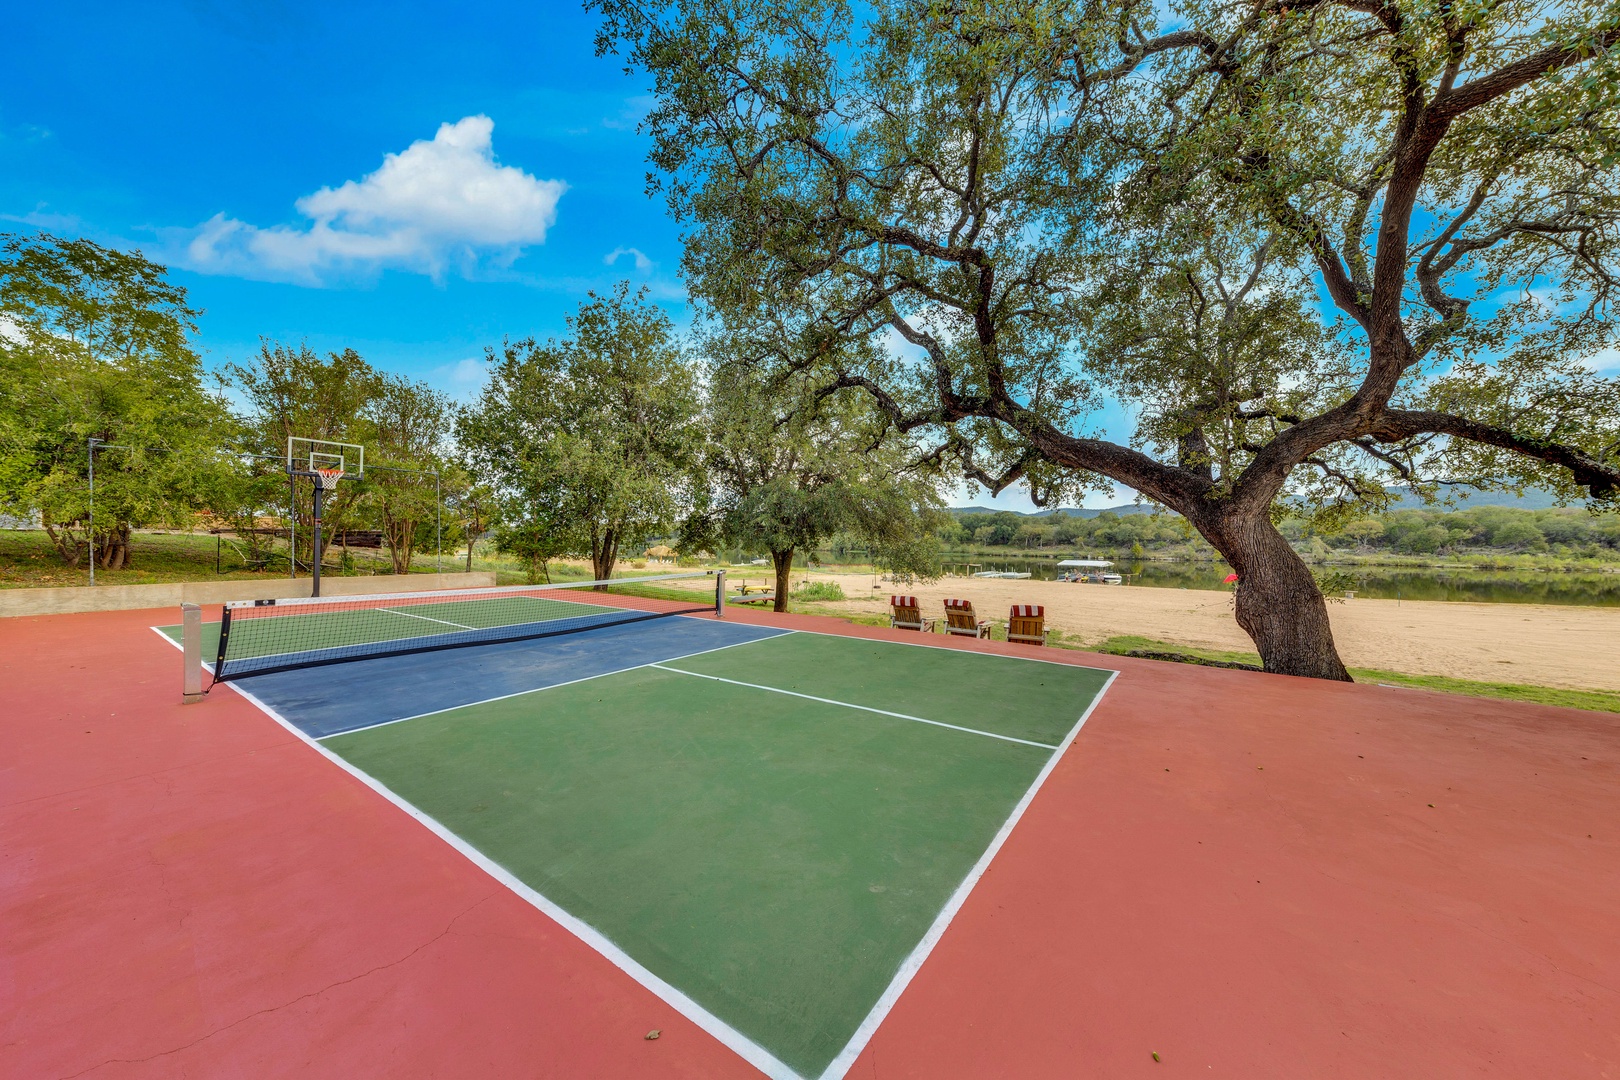 Feeling competitive? Bust out the paddles & play a game of lakeside pickleball